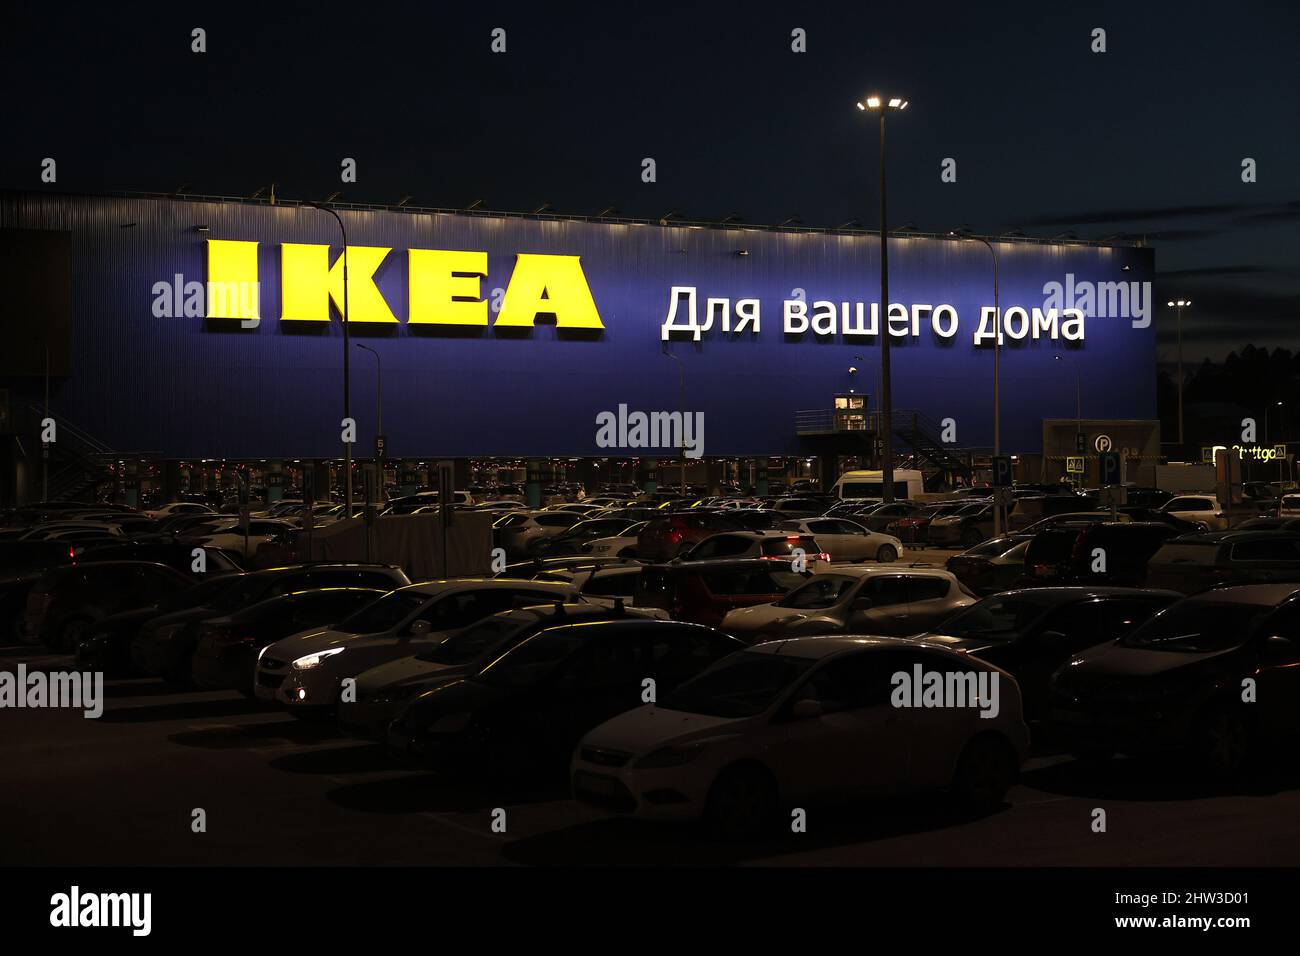 Ikea Parked Cars High Resolution Stock Photography and Images - Alamy